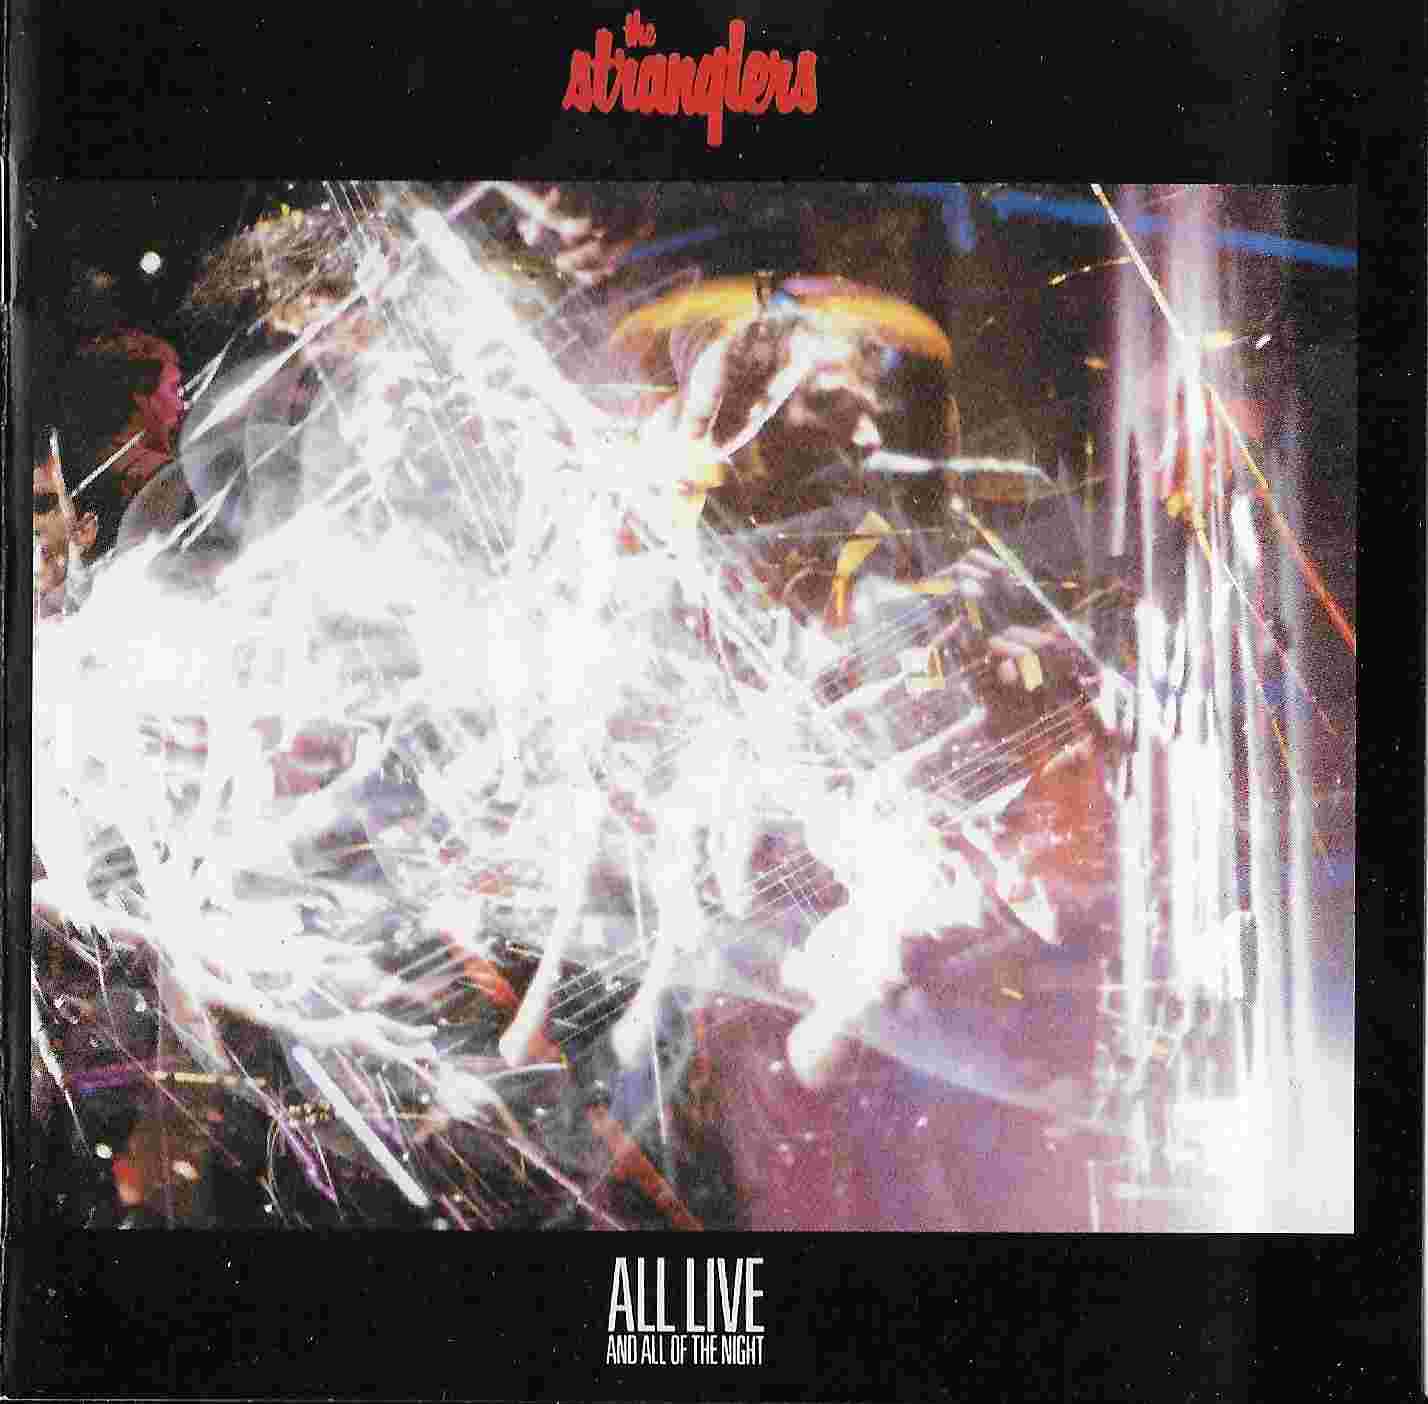 Picture of 460259 2 All live and all of the night by artist The Stranglers